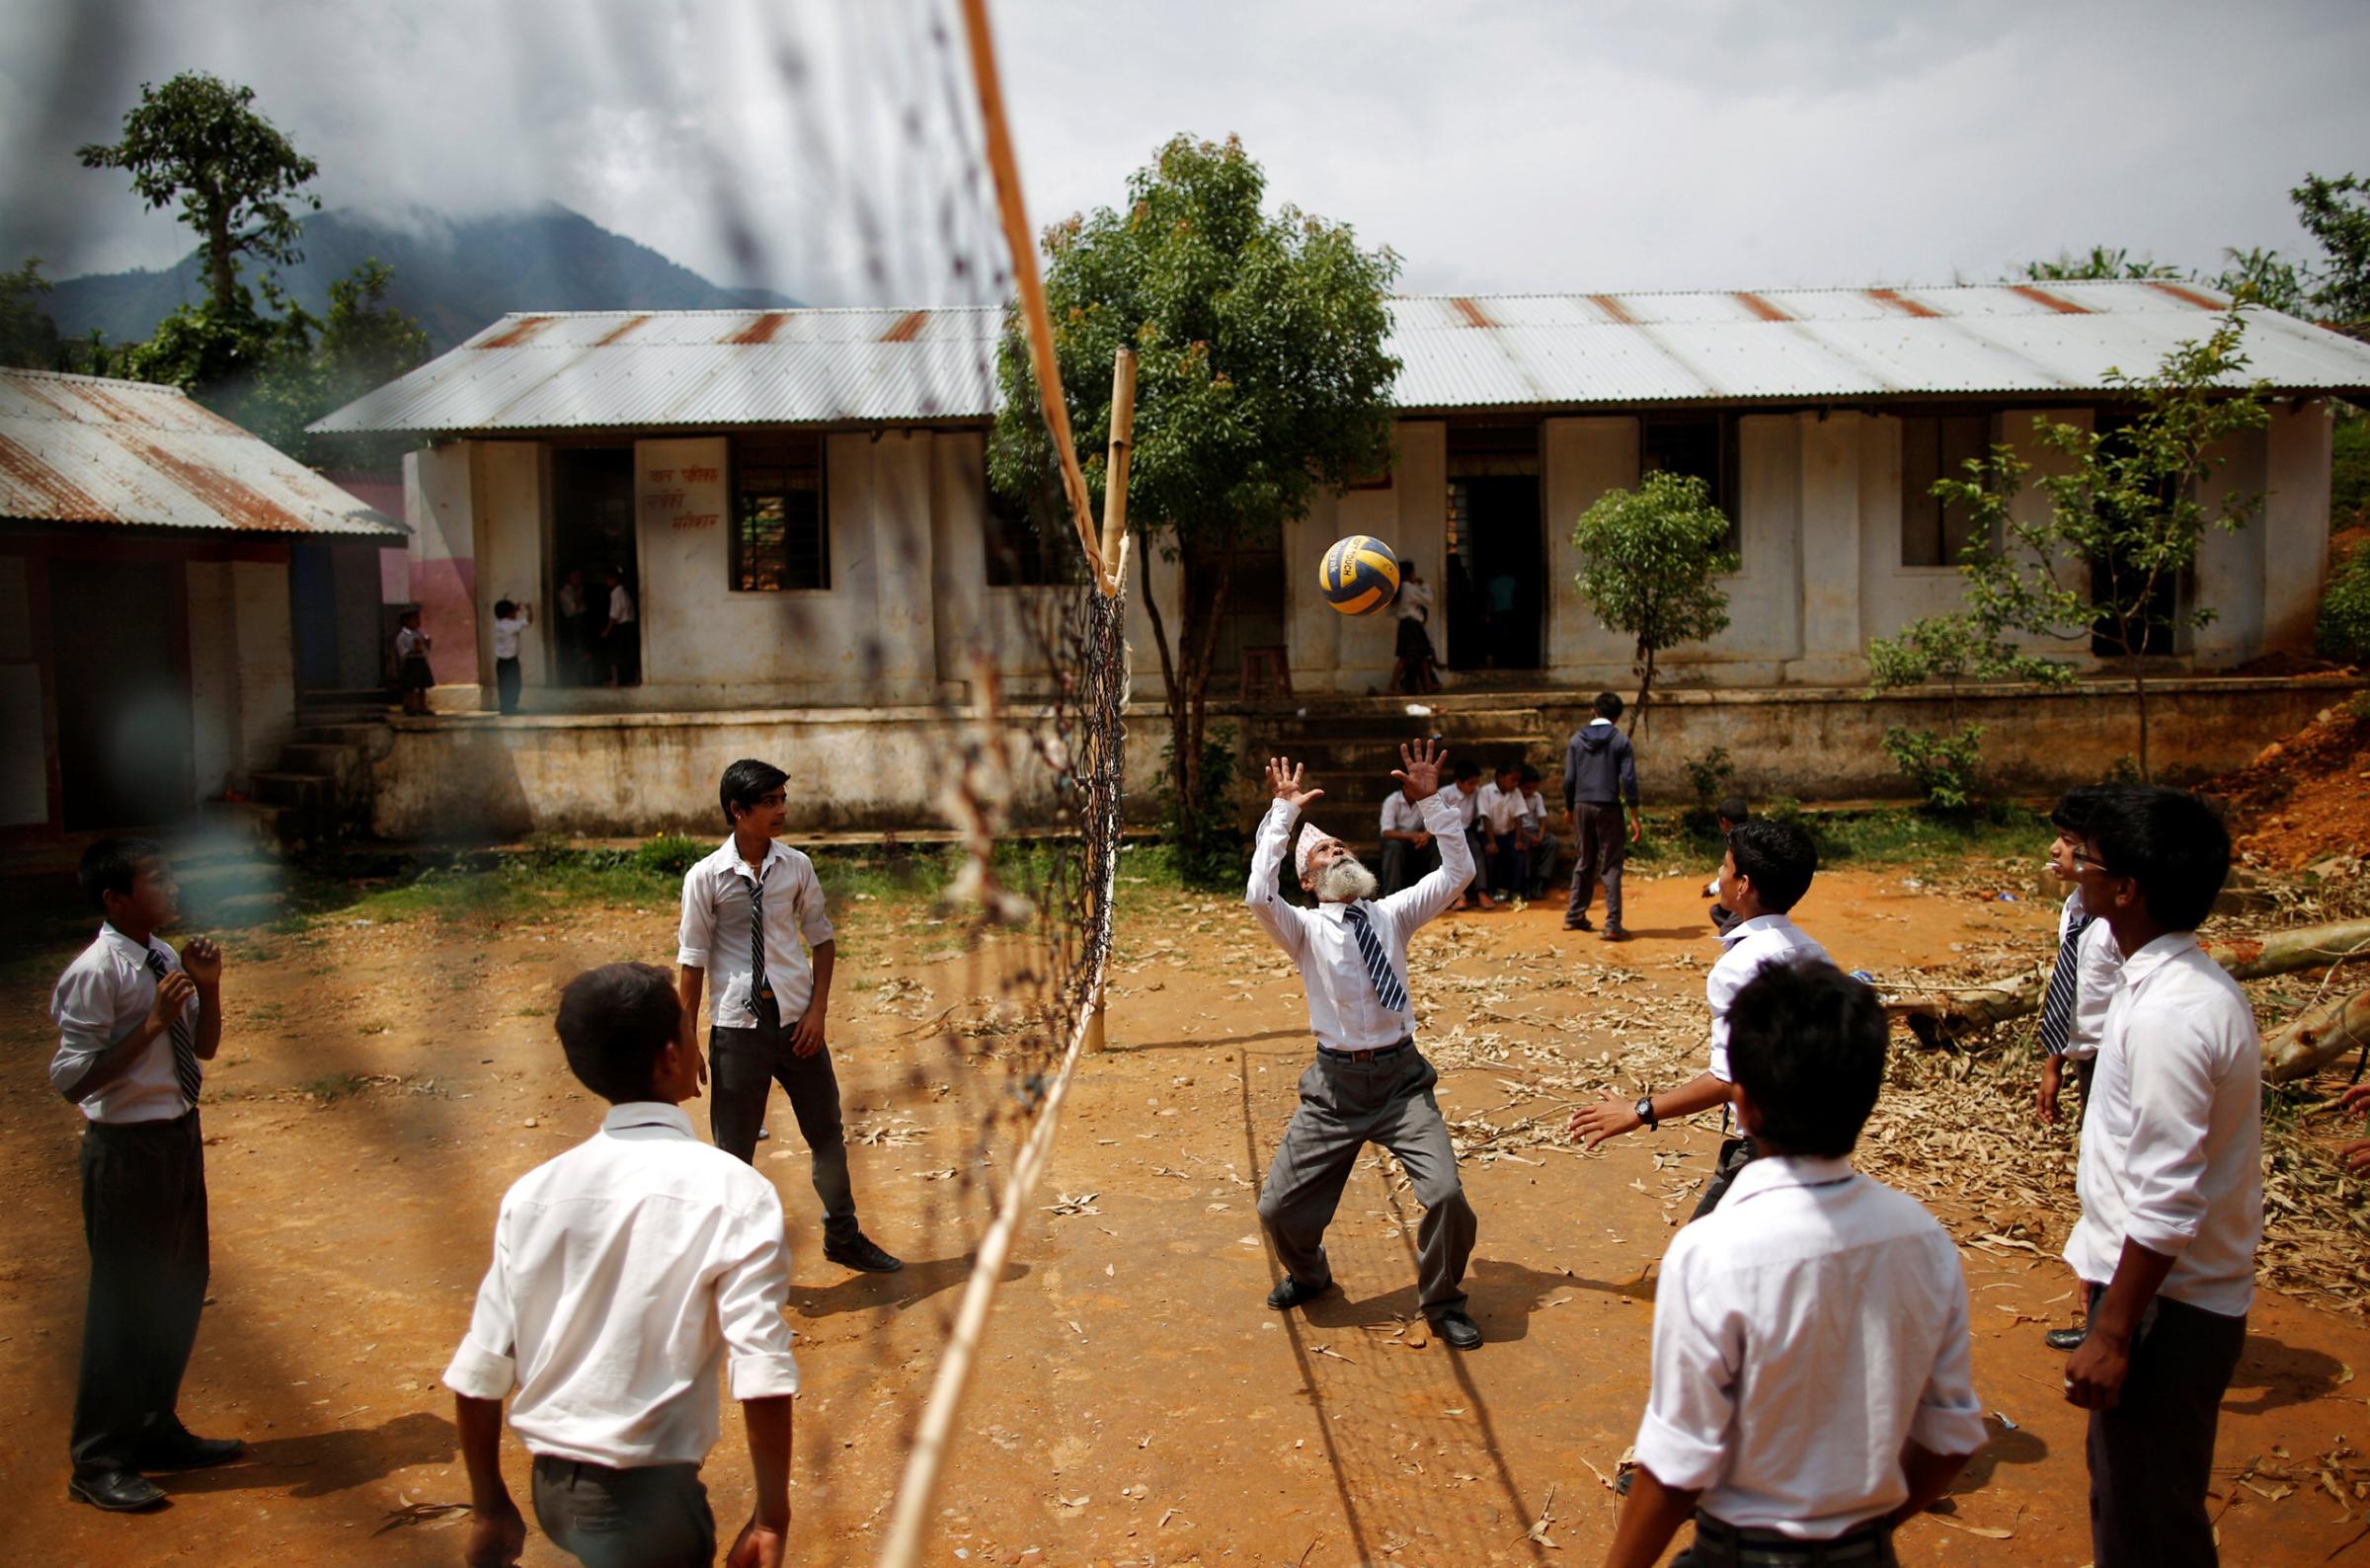 Durga Kami, 68, who is studying in the tenth grade at Shree Kala Bhairab Higher Secondary School, plays volleyball with friends during a break in Syangja, Nepal, June 5, 2016. REUTERS/Navesh Chitrakar. SEARCH "DURGA KAMI" FOR THIS STORY. SEARCH "THE WIDER IMAGE" FOR ALL STORIES . TPX IMAGES OF THE DAY